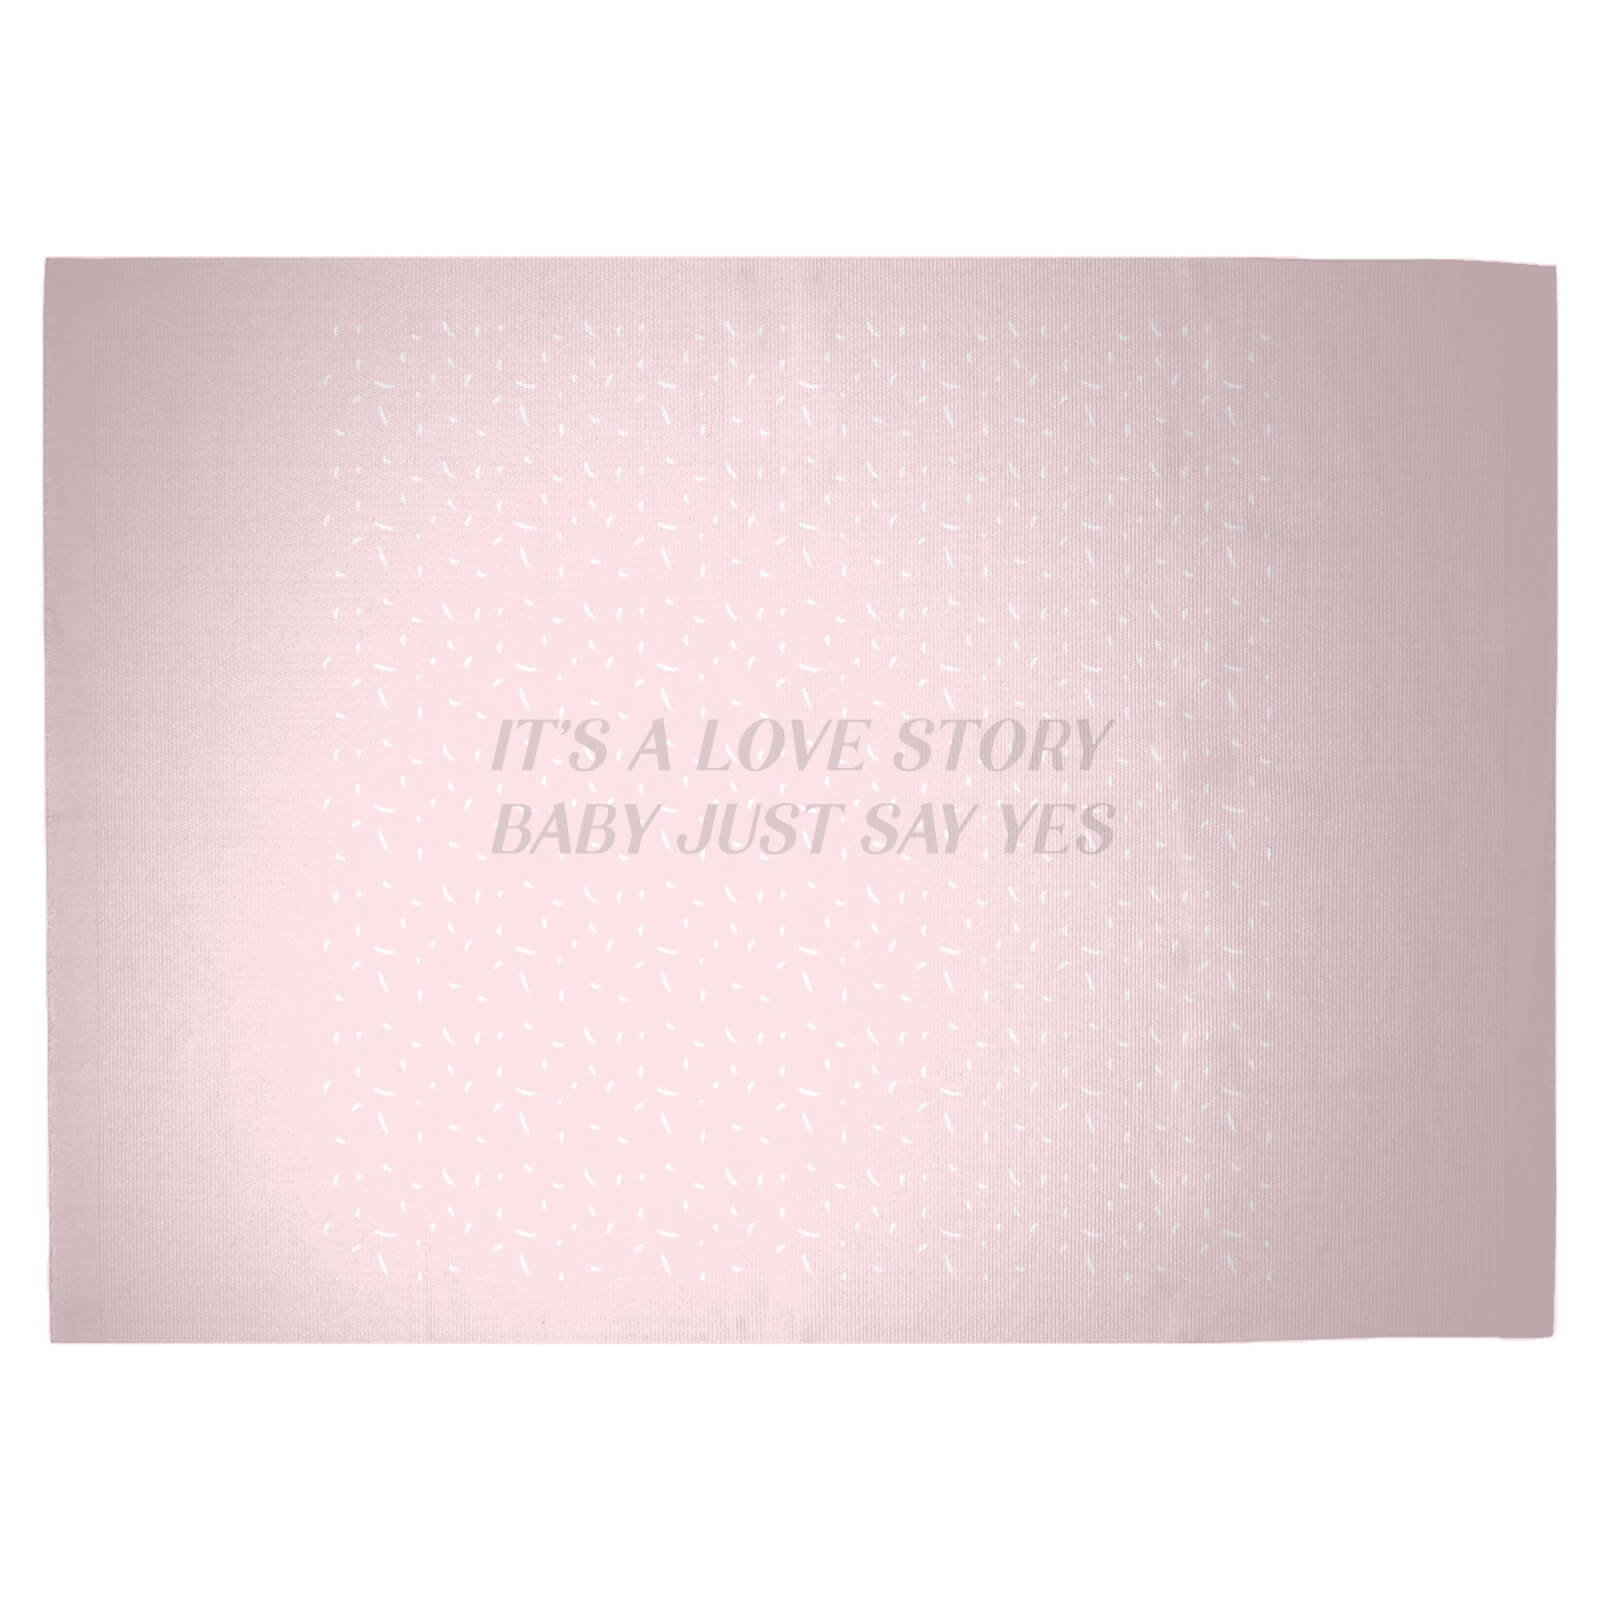 It's A Love Story Woven Rug - Large